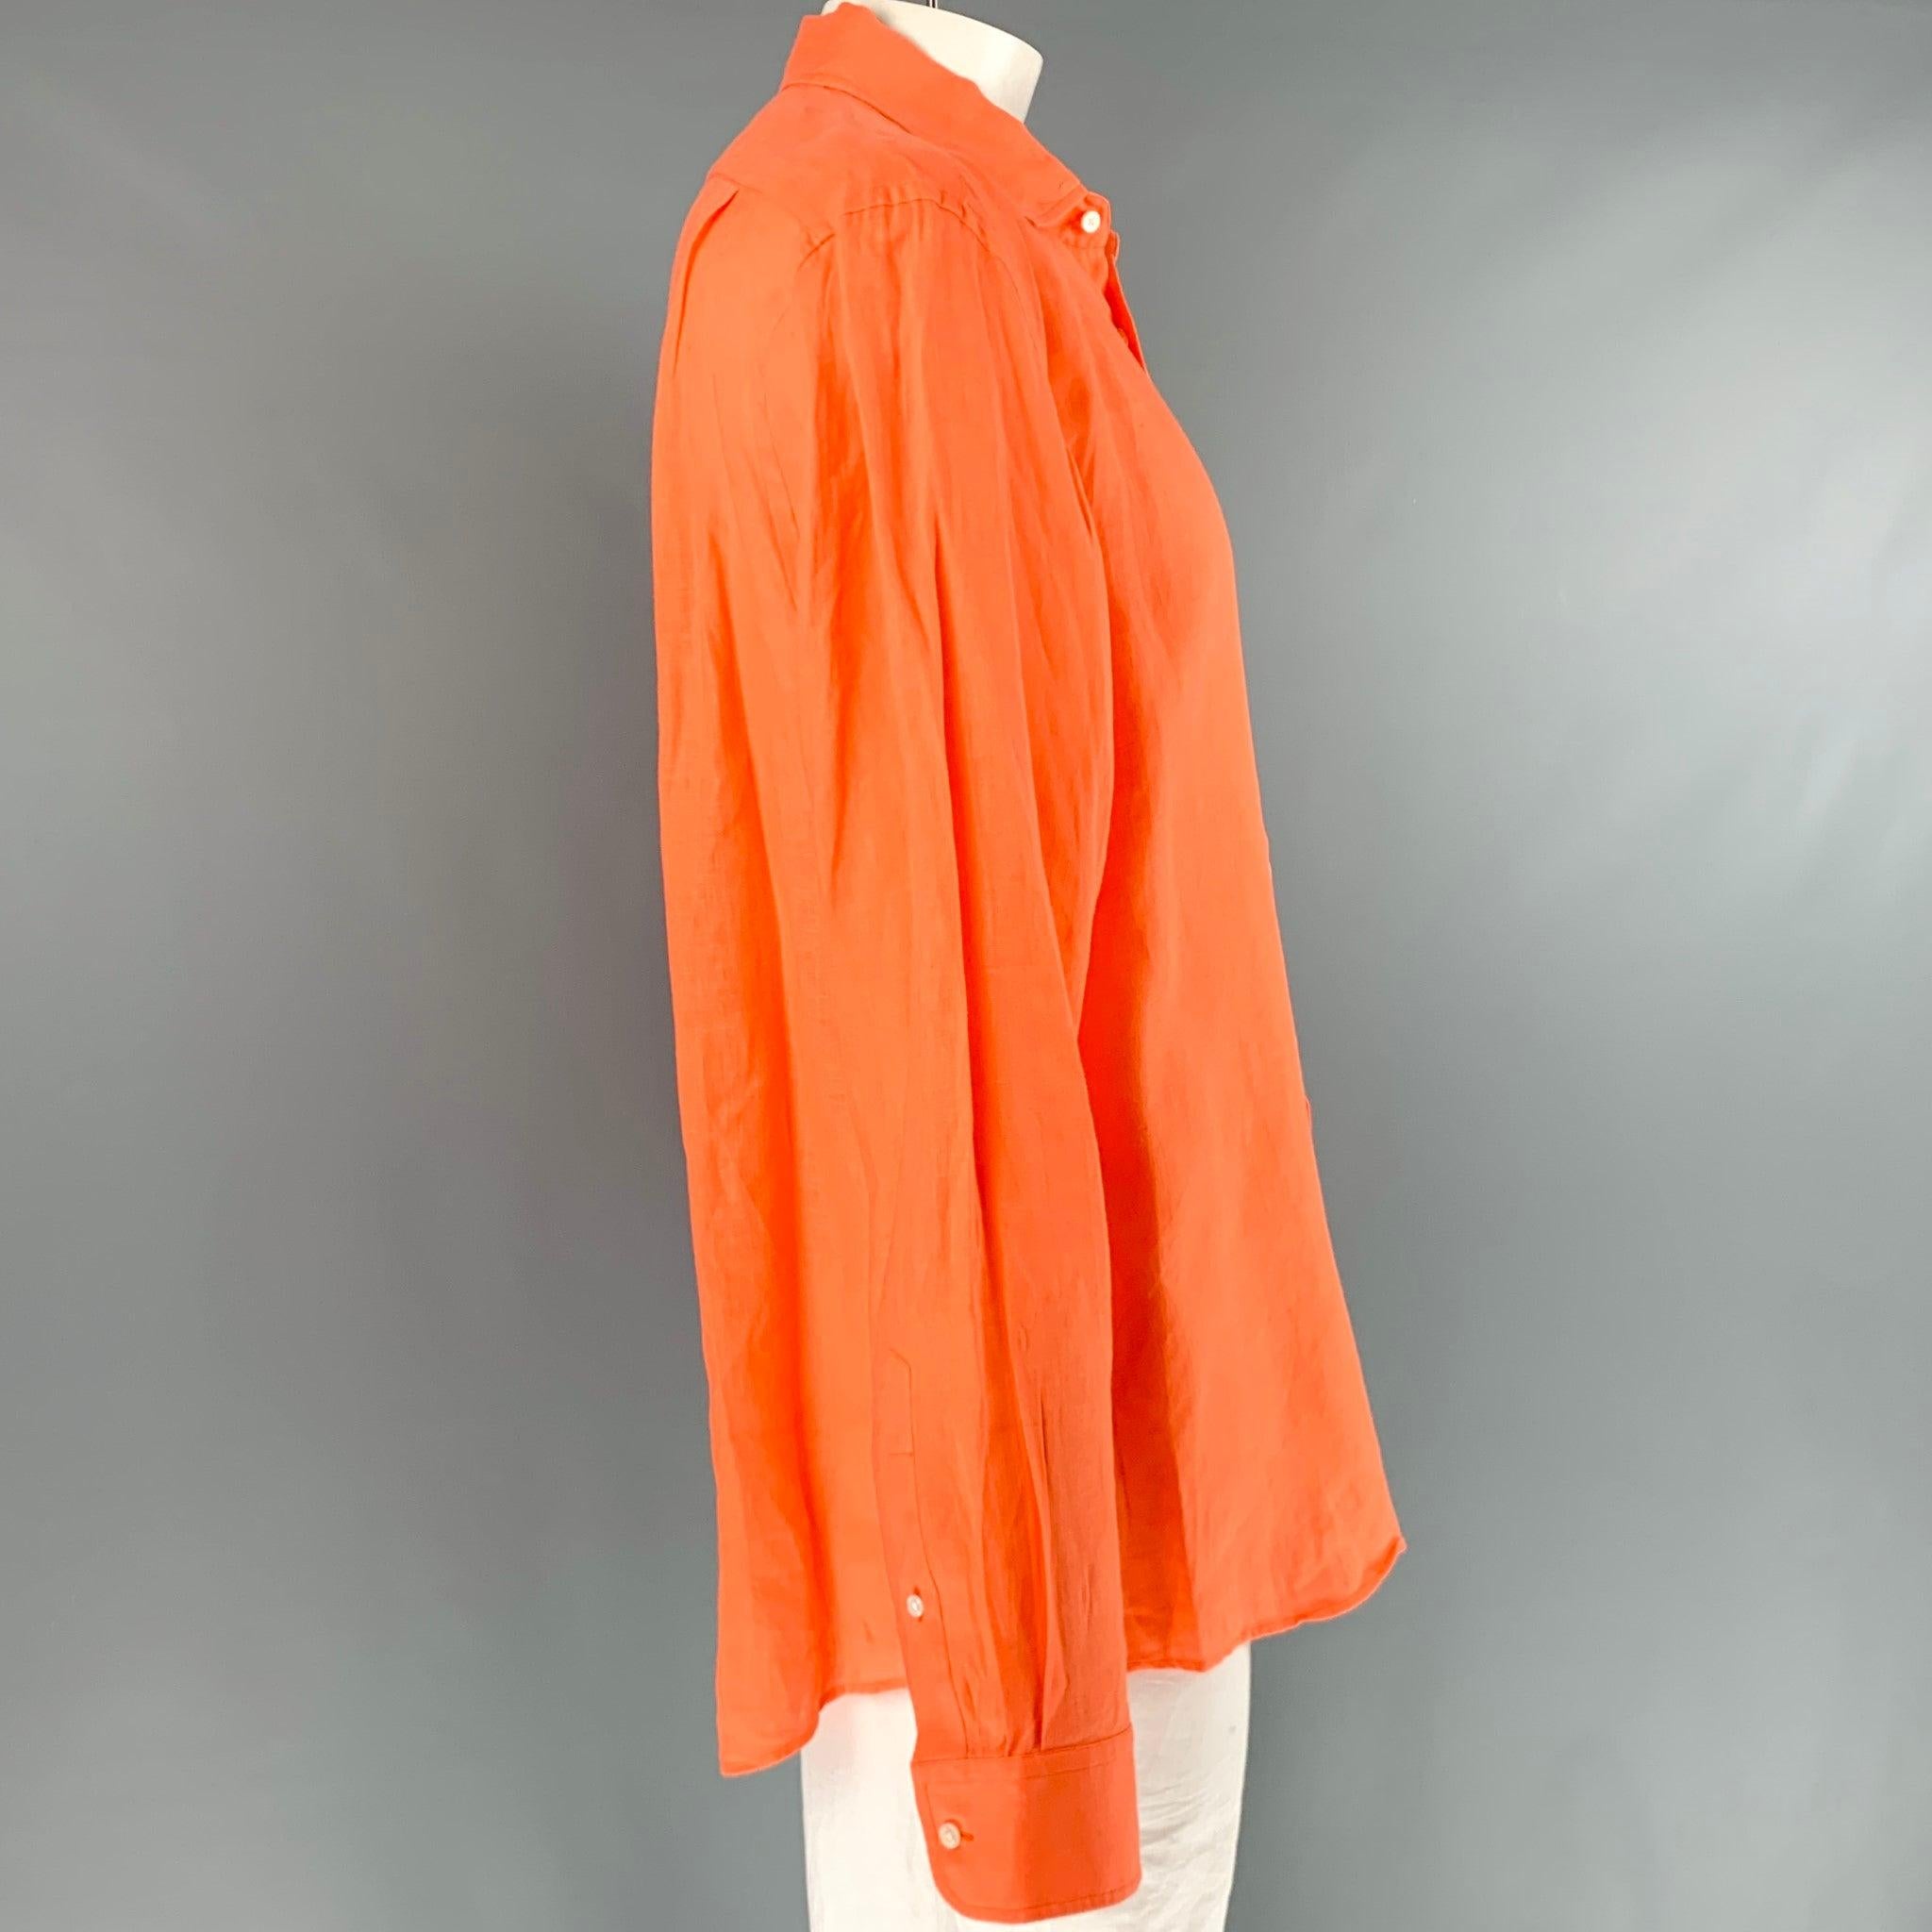 RALPH LAUREN long sleeve shirt in an orange linen fabric featuring spread collar and button closure. Made in Italy.Excellent Pre-Owned Condition. 

Marked:   XXL 

Measurements: 
 
Shoulder: 19 inches Chest: 50 inches Sleeve: 27 inches Length: 31.5